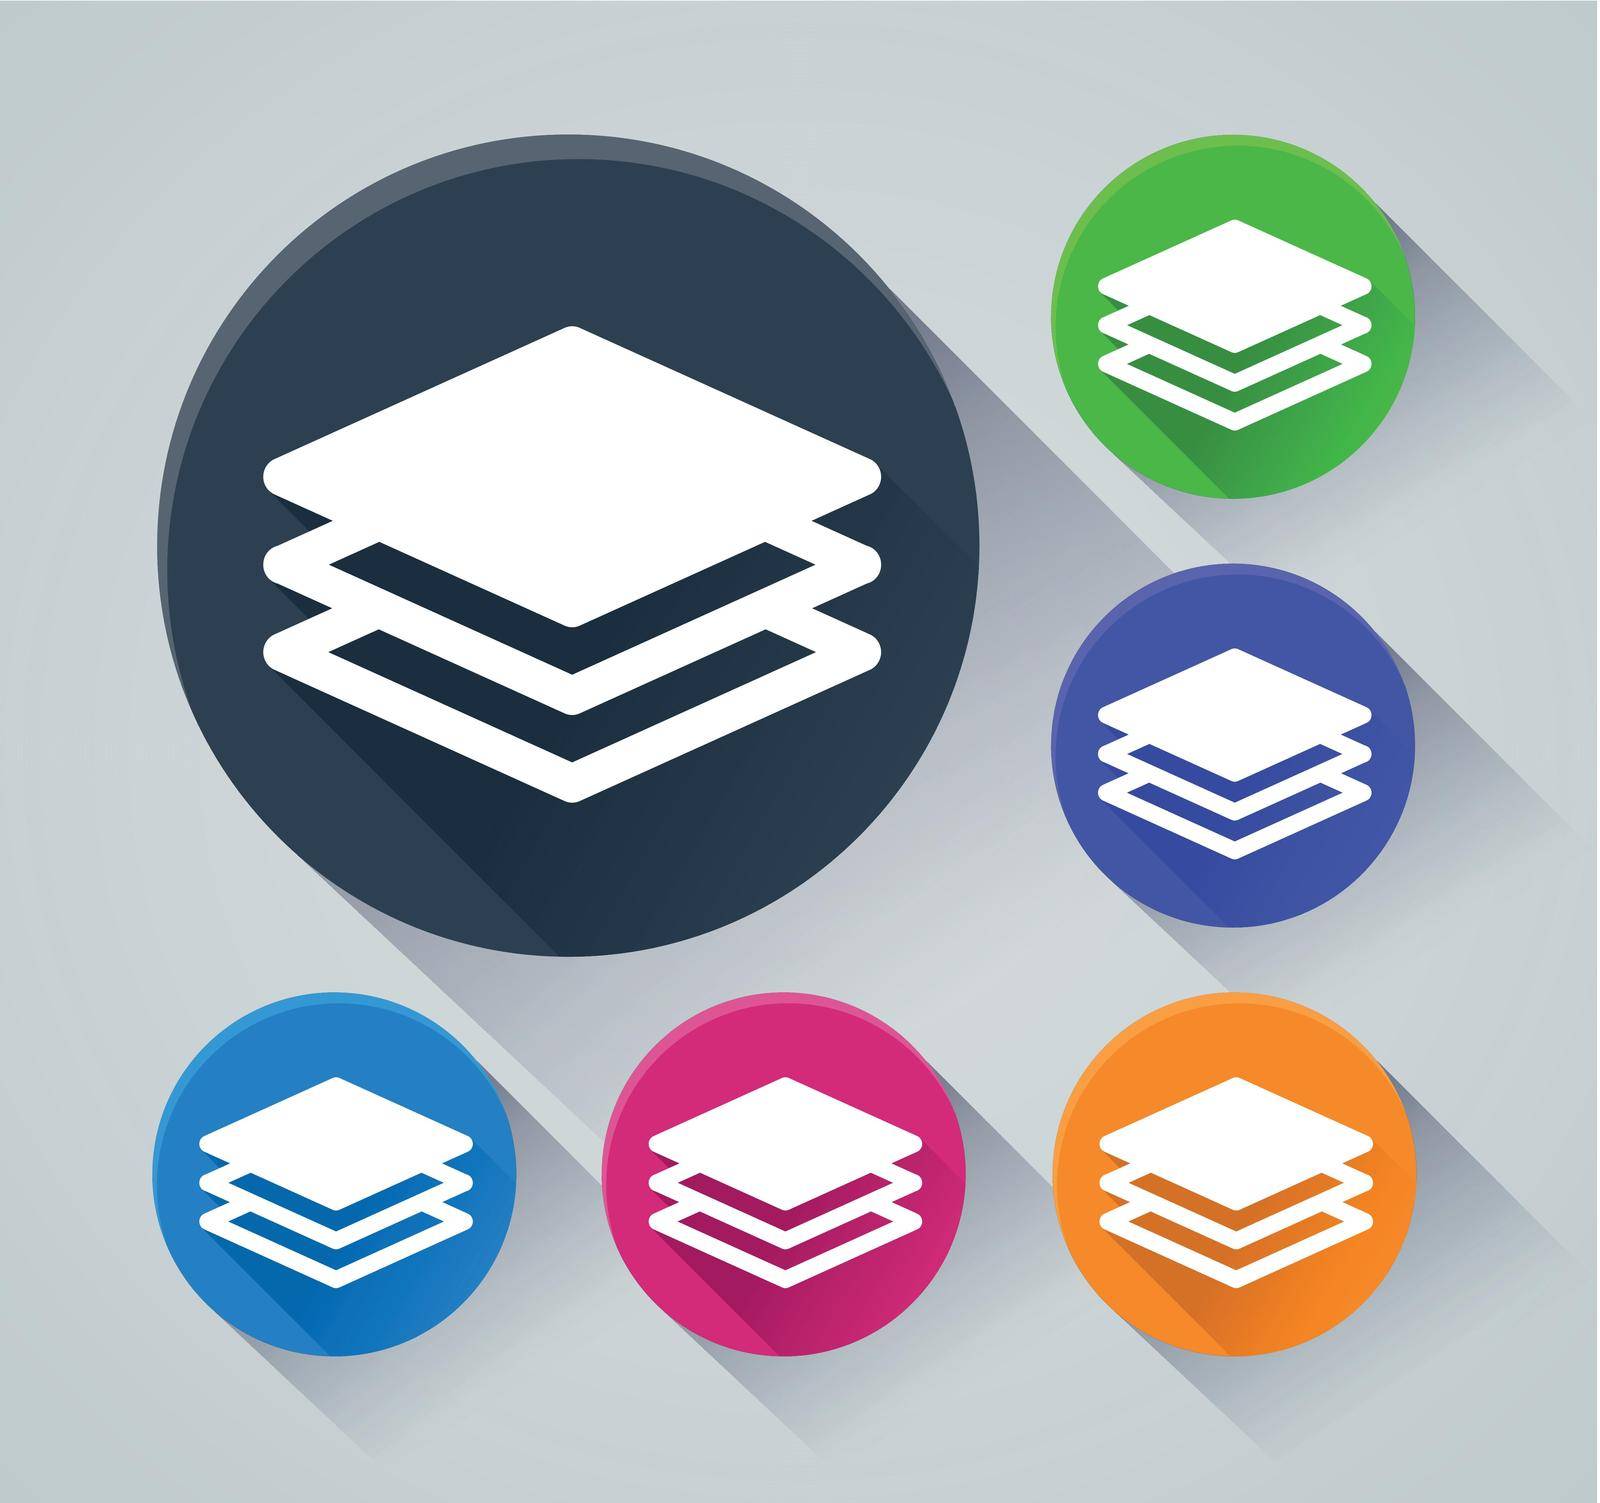 Illustration of layers circle icons with shadow